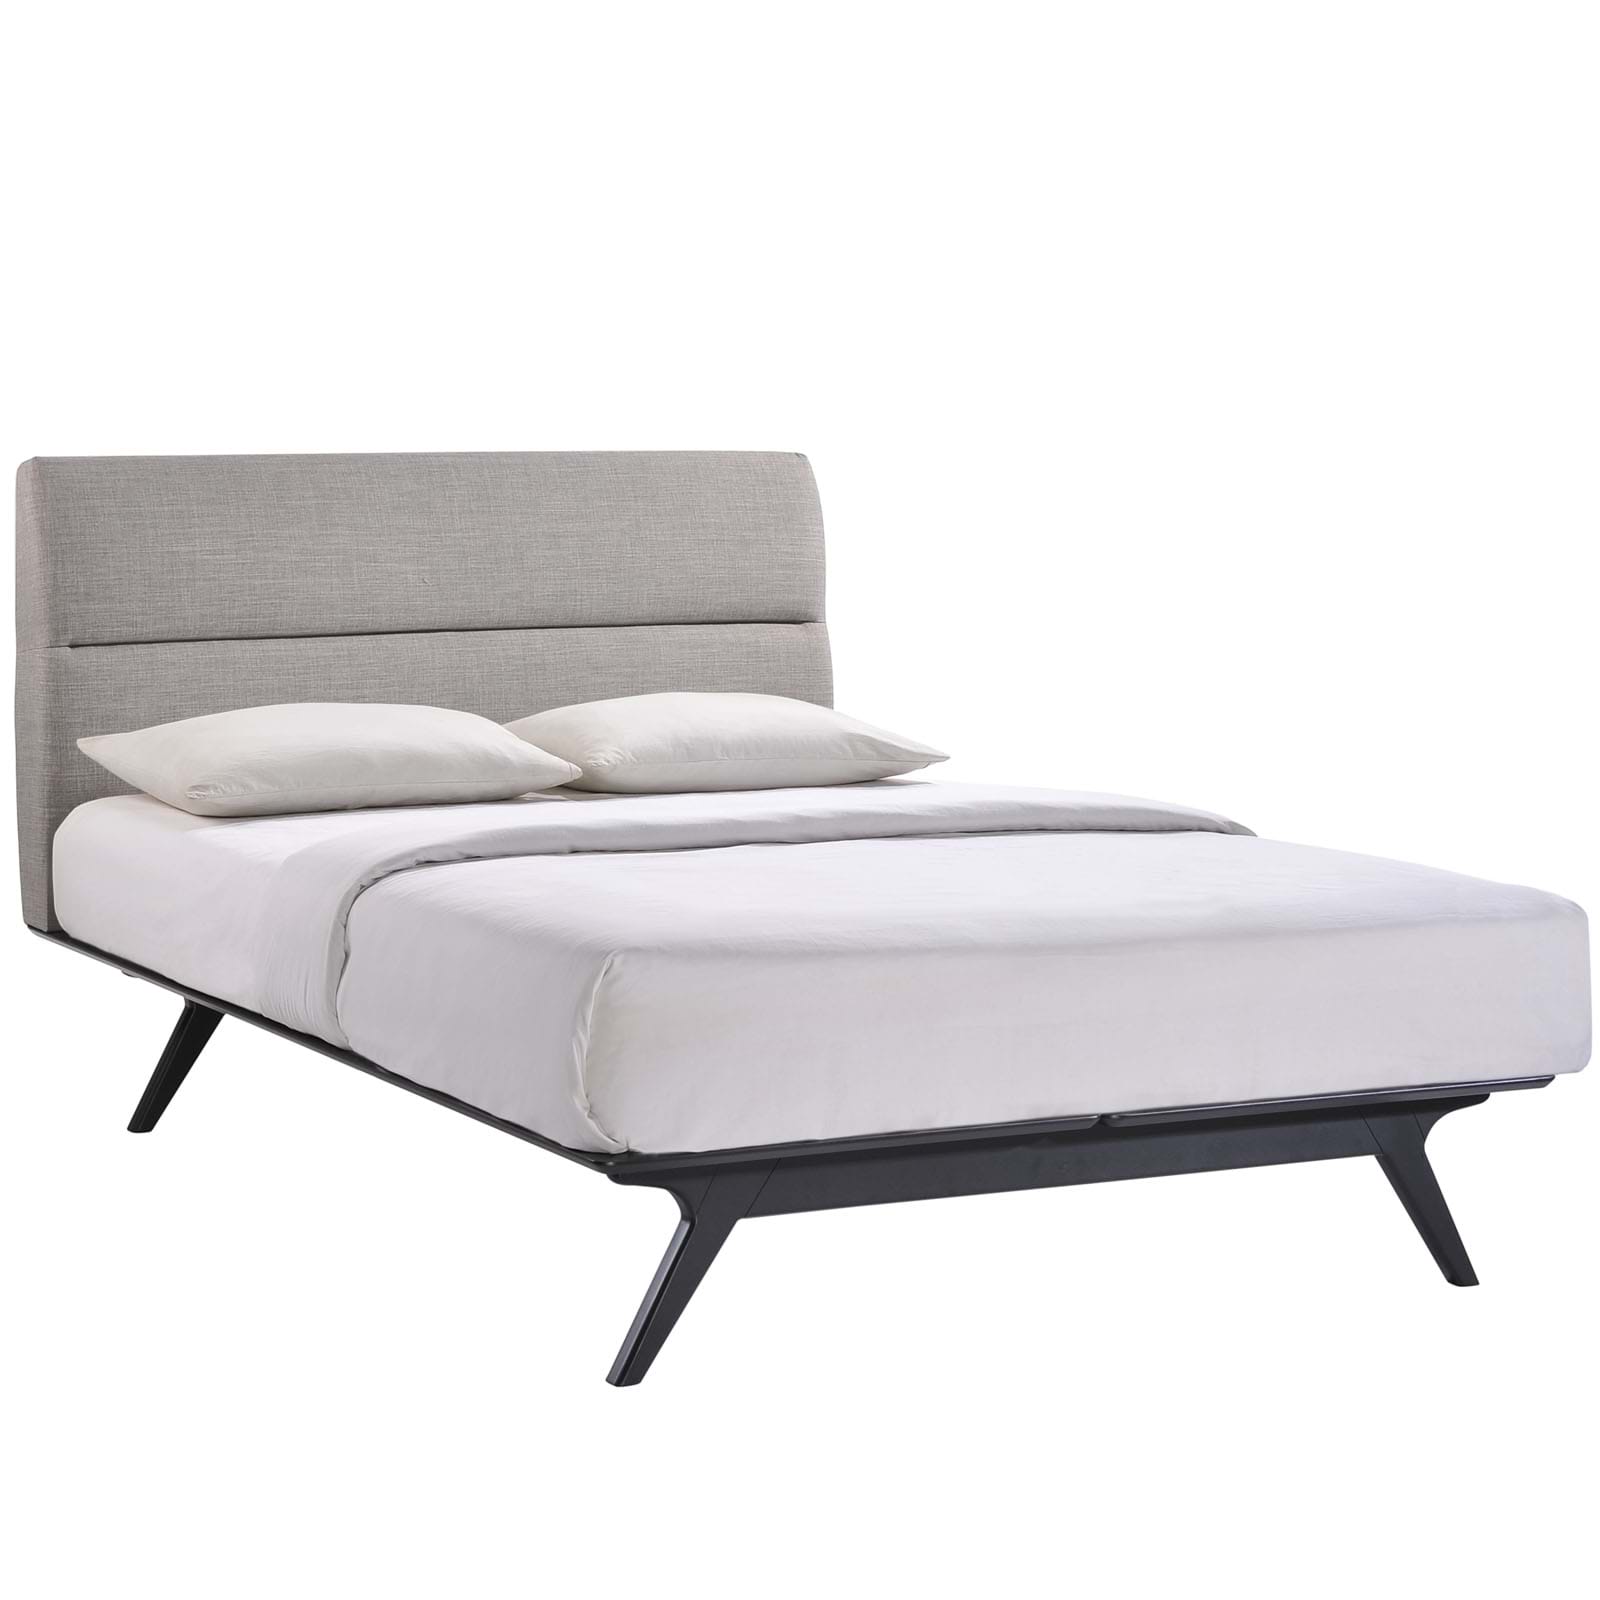 Addison Queen Bed in Black Gray